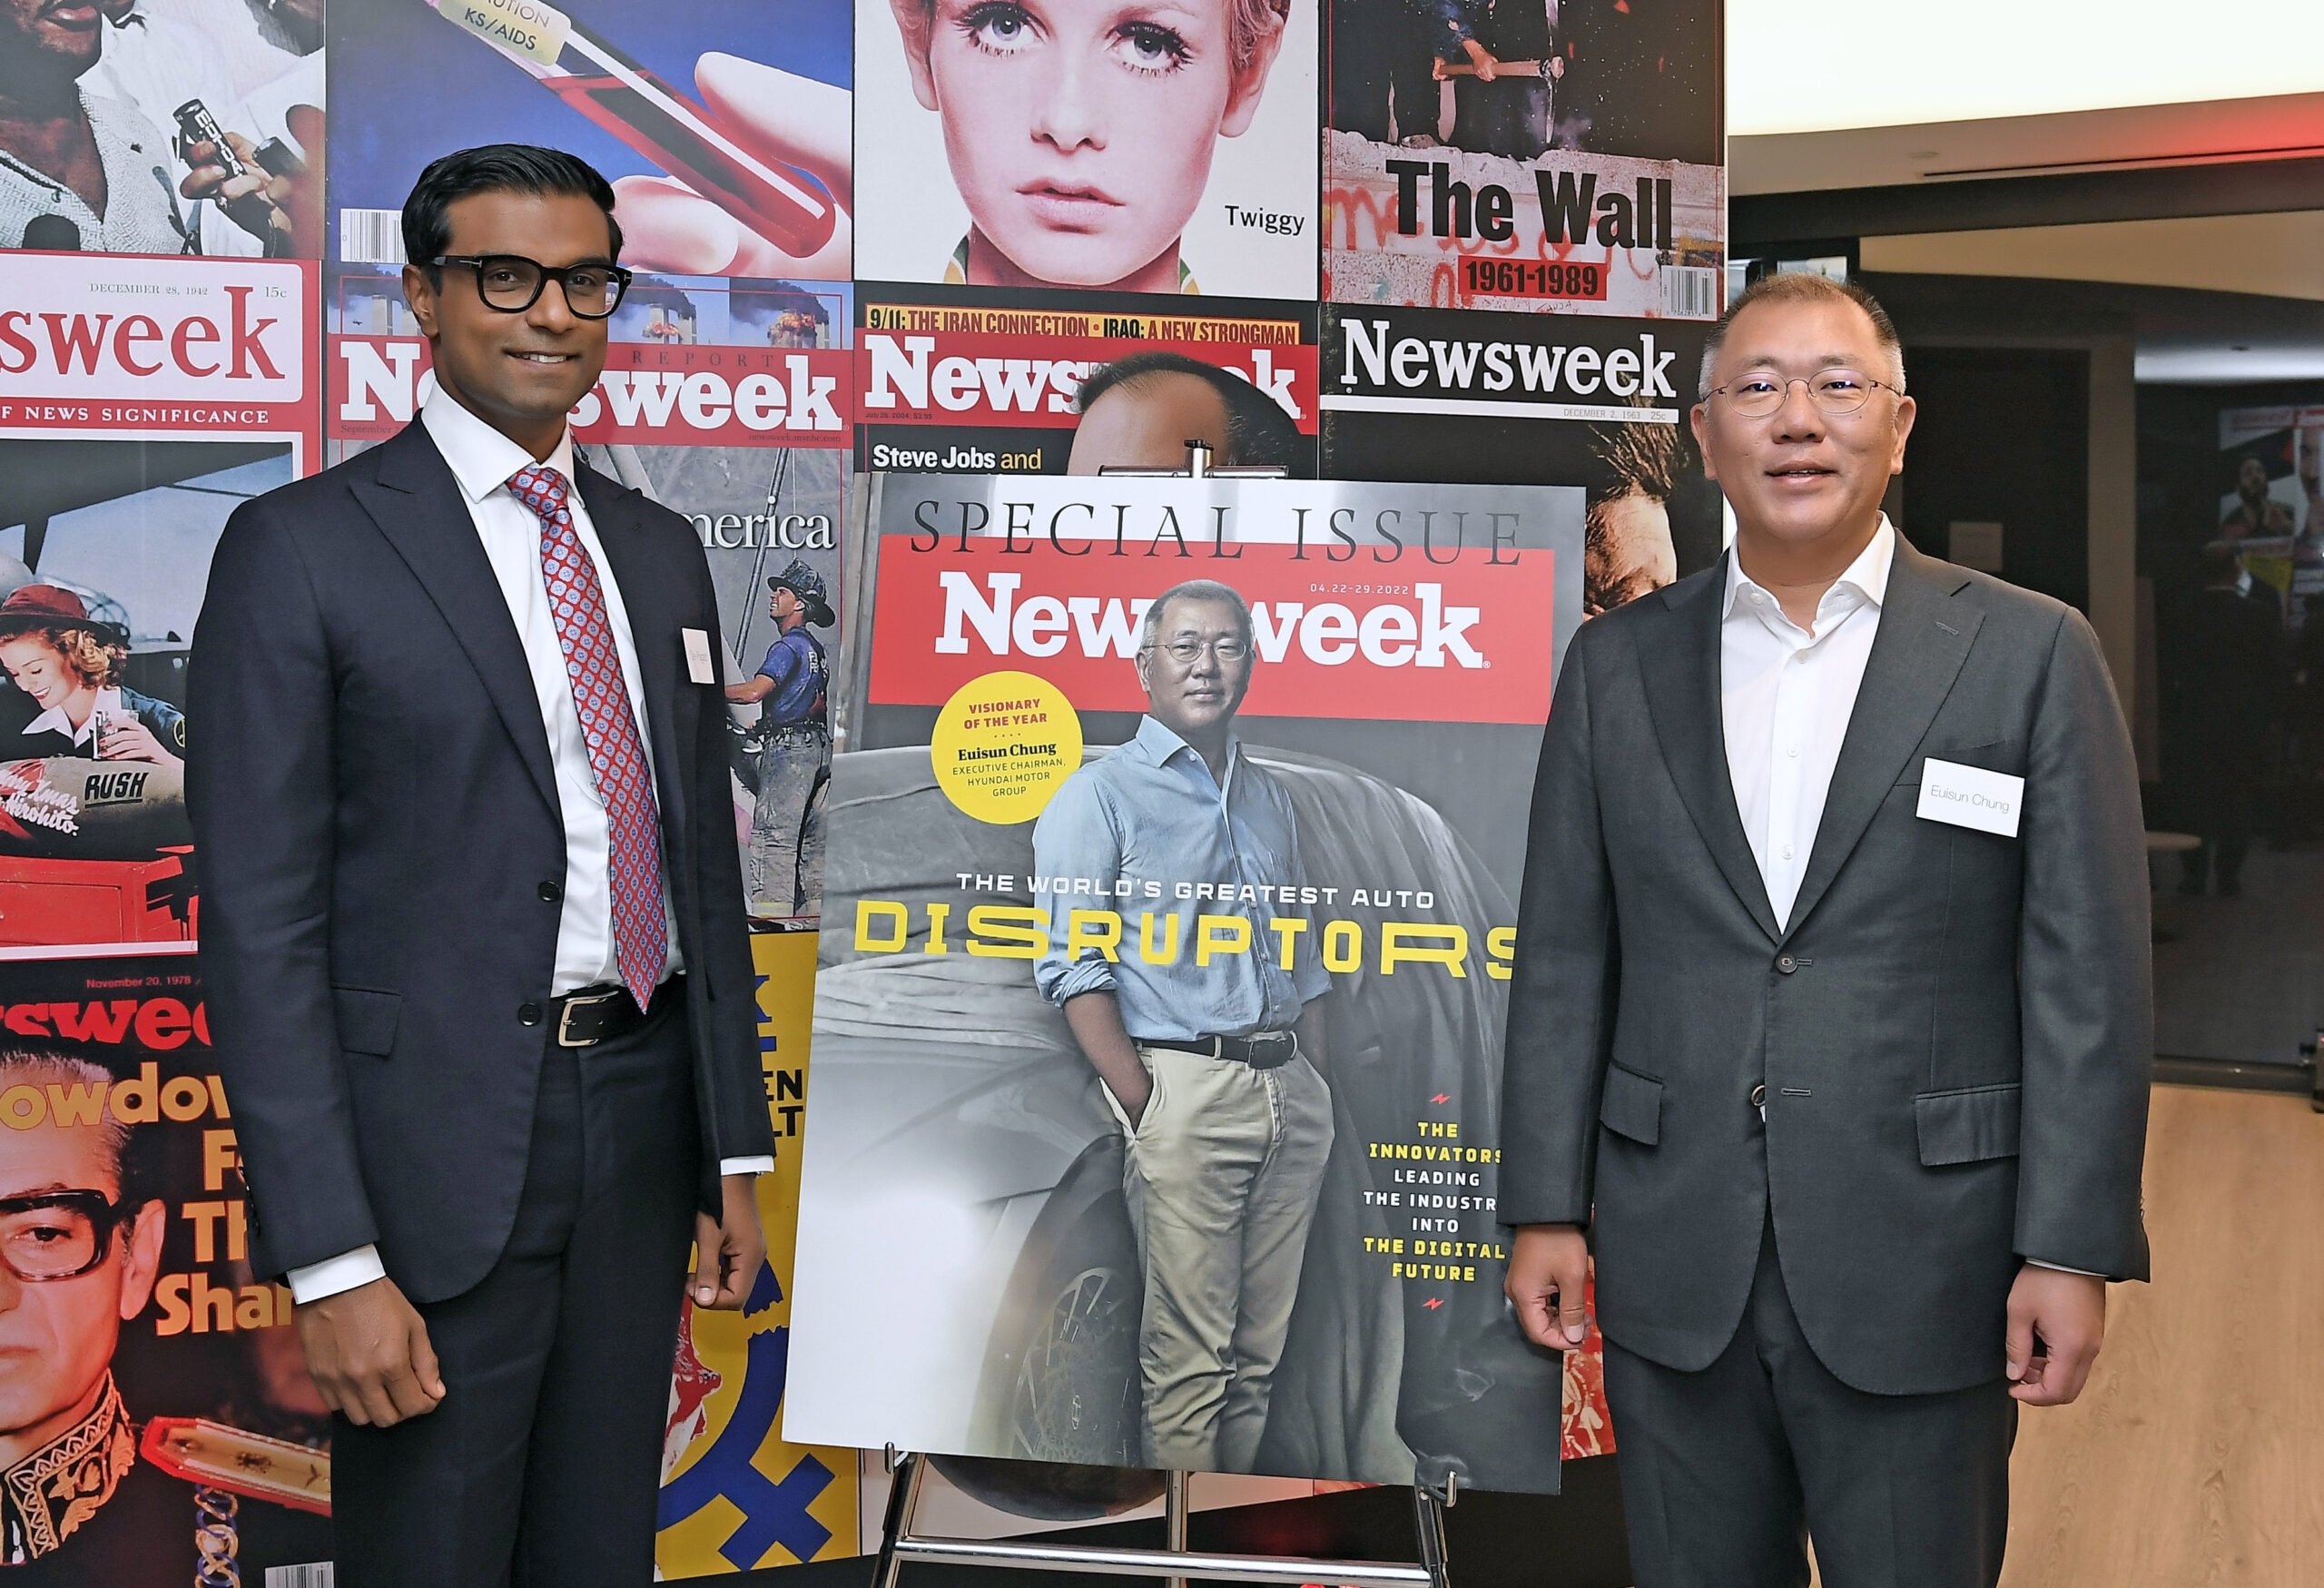 Euisun Chung receives award by Newsweek for 'Visionary of the Year'